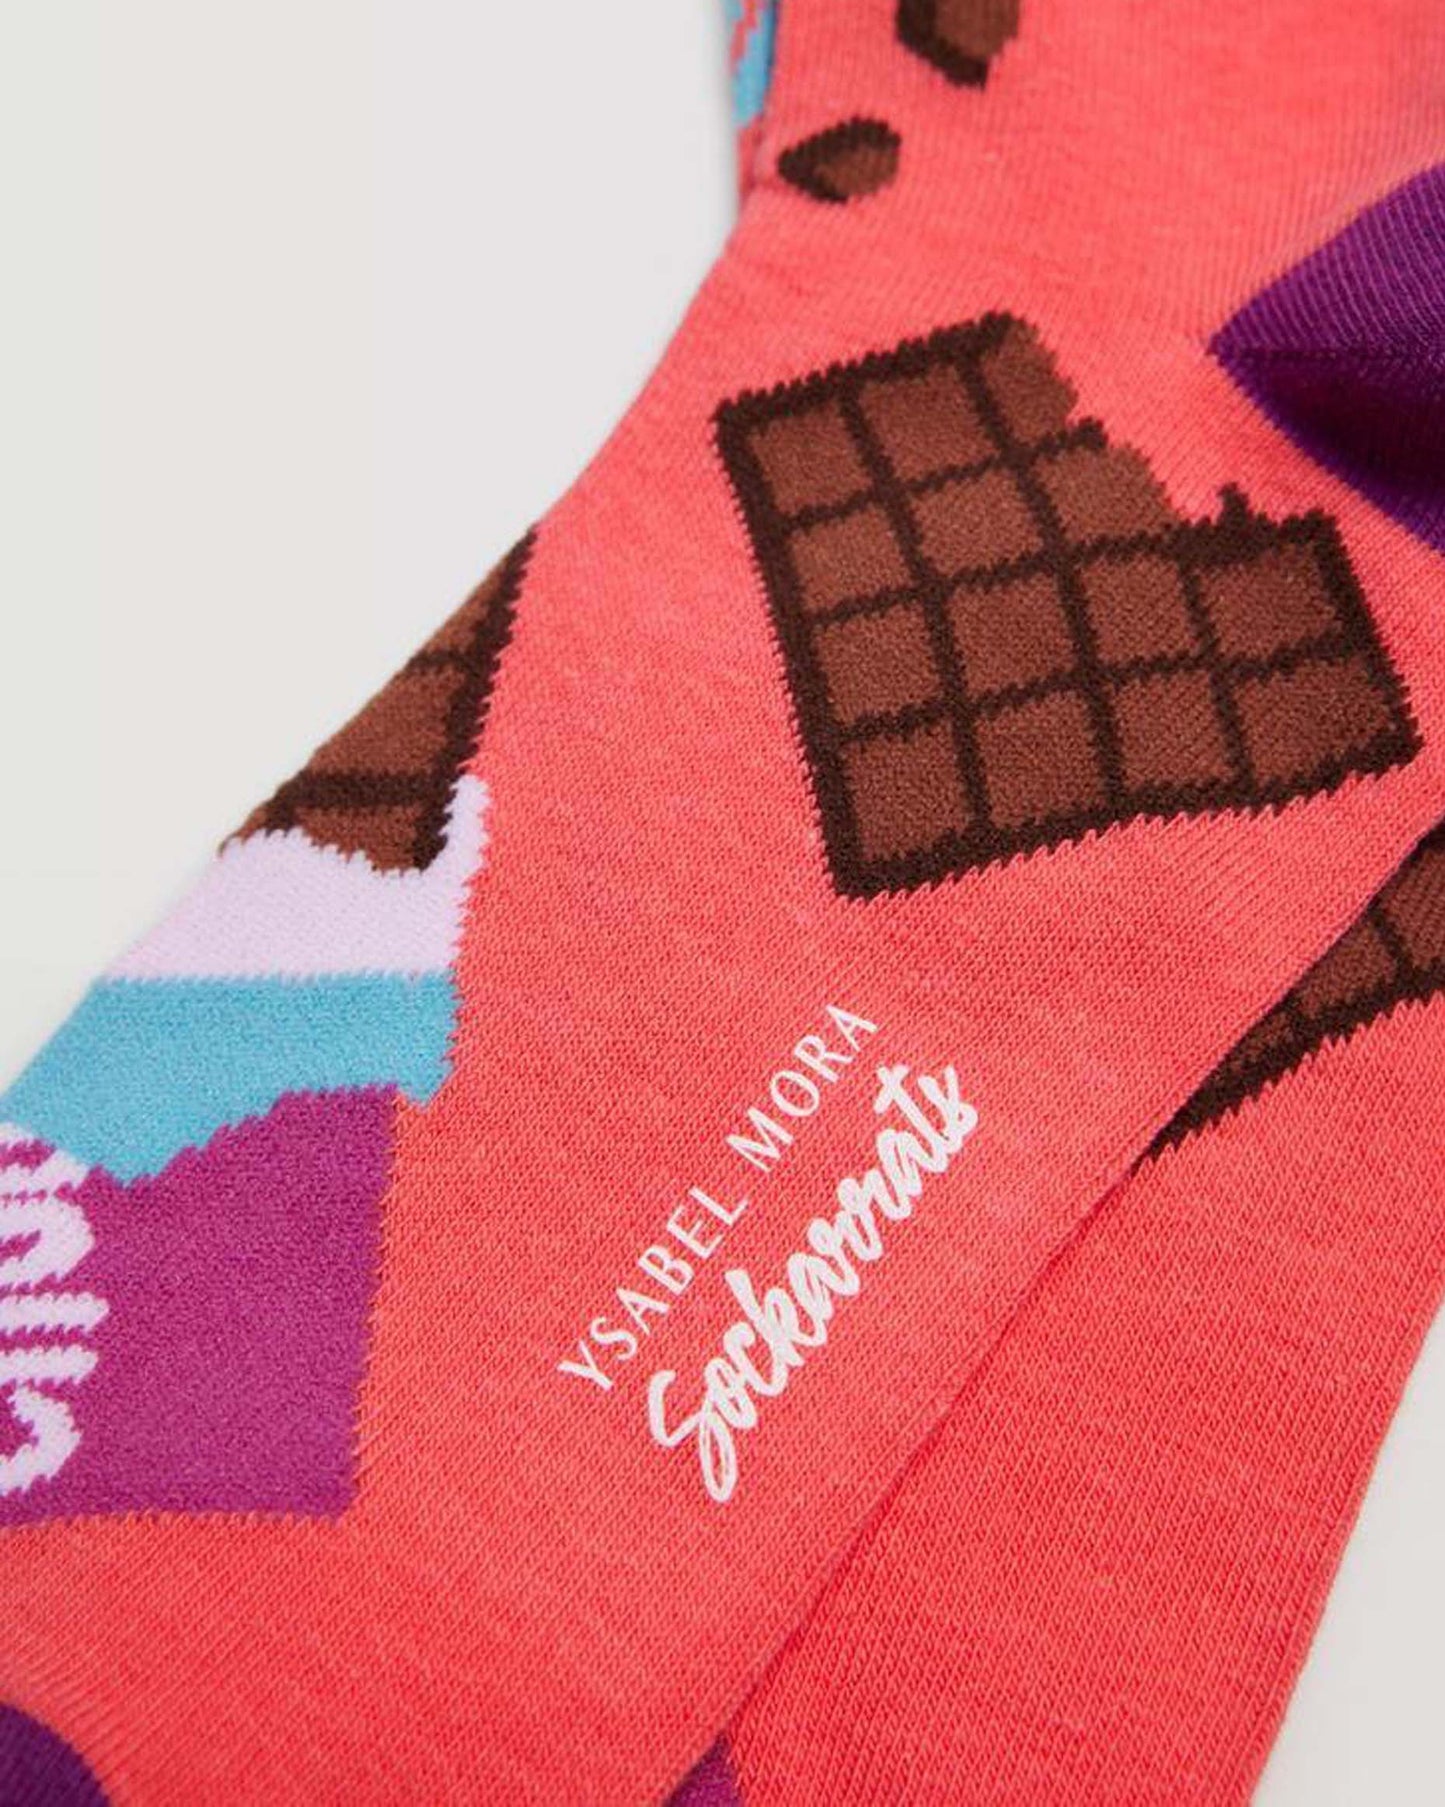 Ysabel Mora Sockarrats Chocolate Bar Socks - Bright coral coloured cotton socks with an all over pattern of chocolate bars pattern in brown, turquoise, purple and black, purple heel.